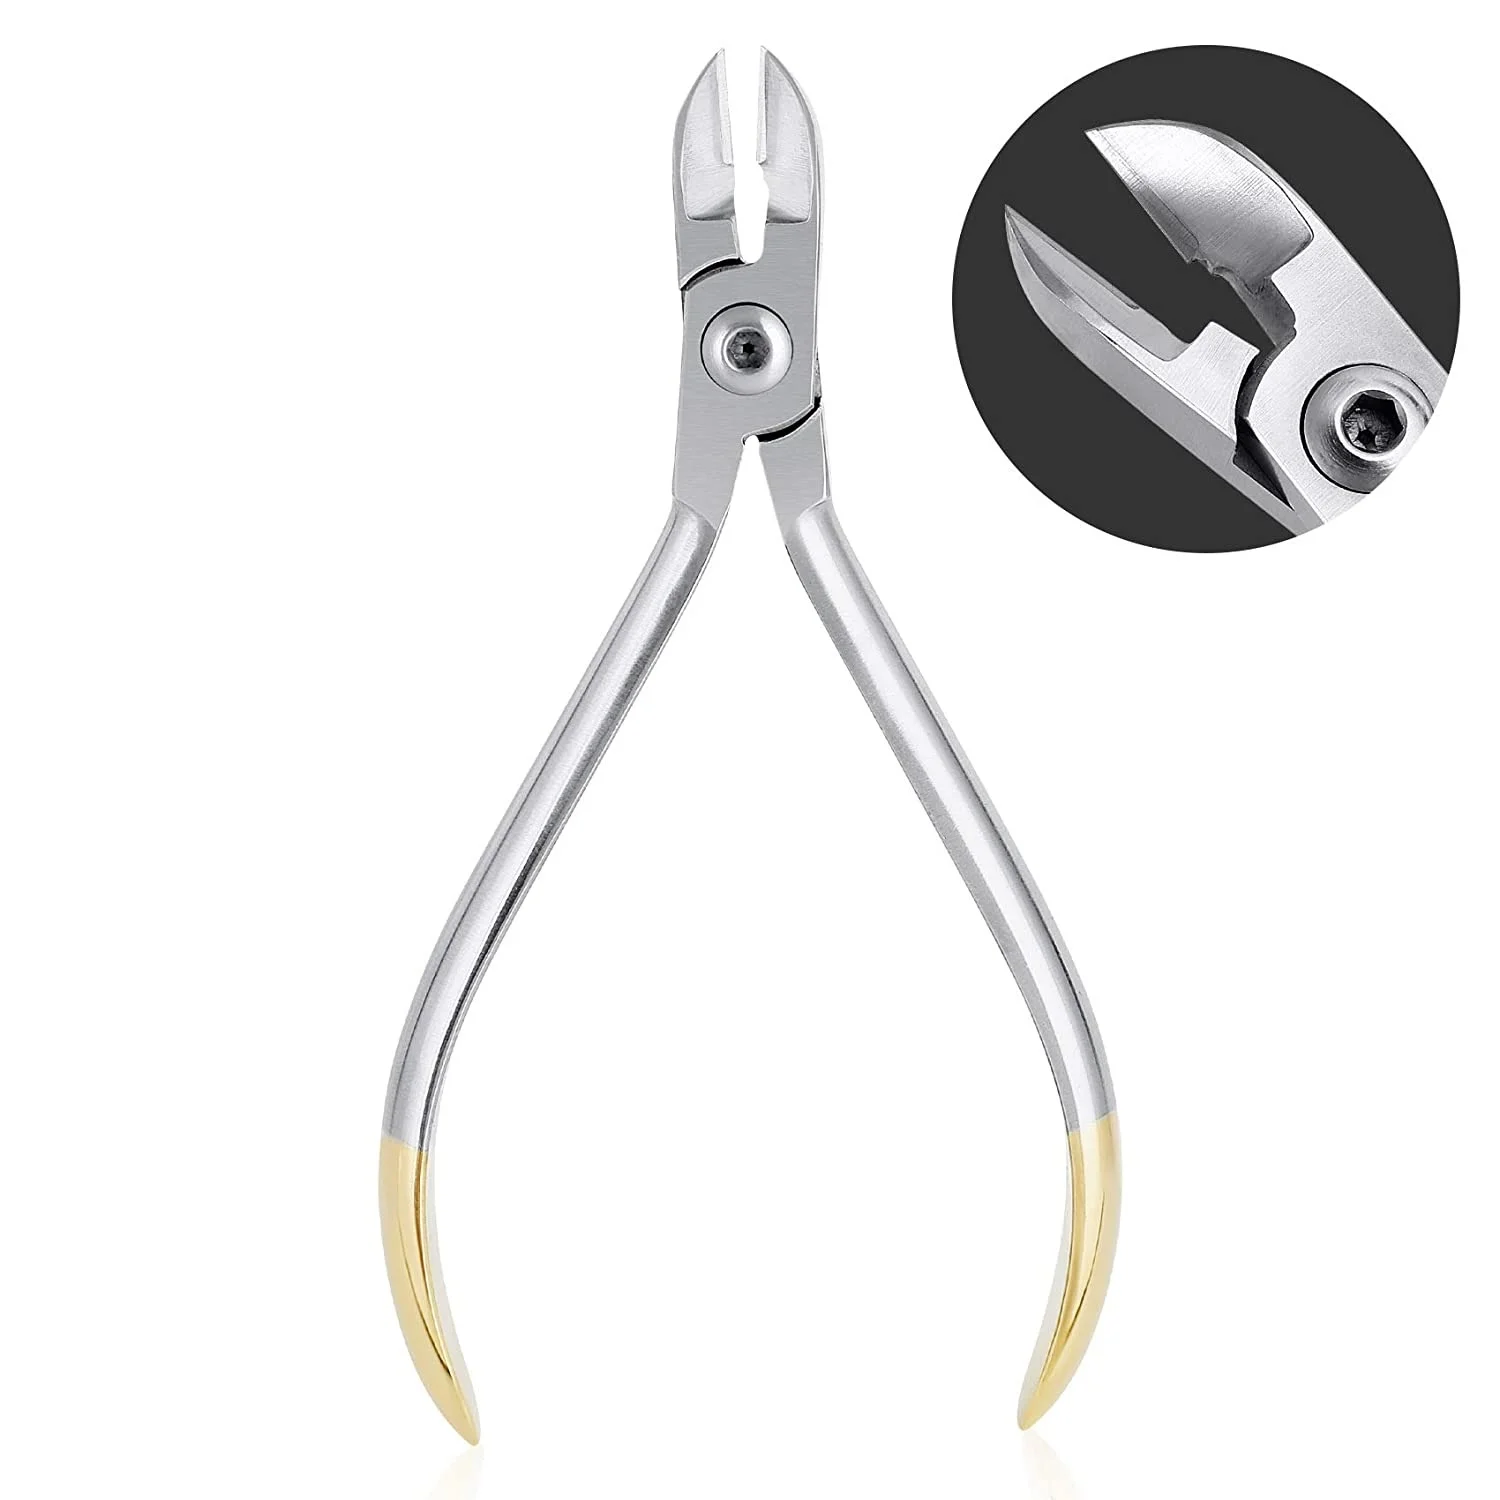 

Dental Ligature Cutter Plier, Orthodontic Light Wire Cutting Pliers Instruments with Tip